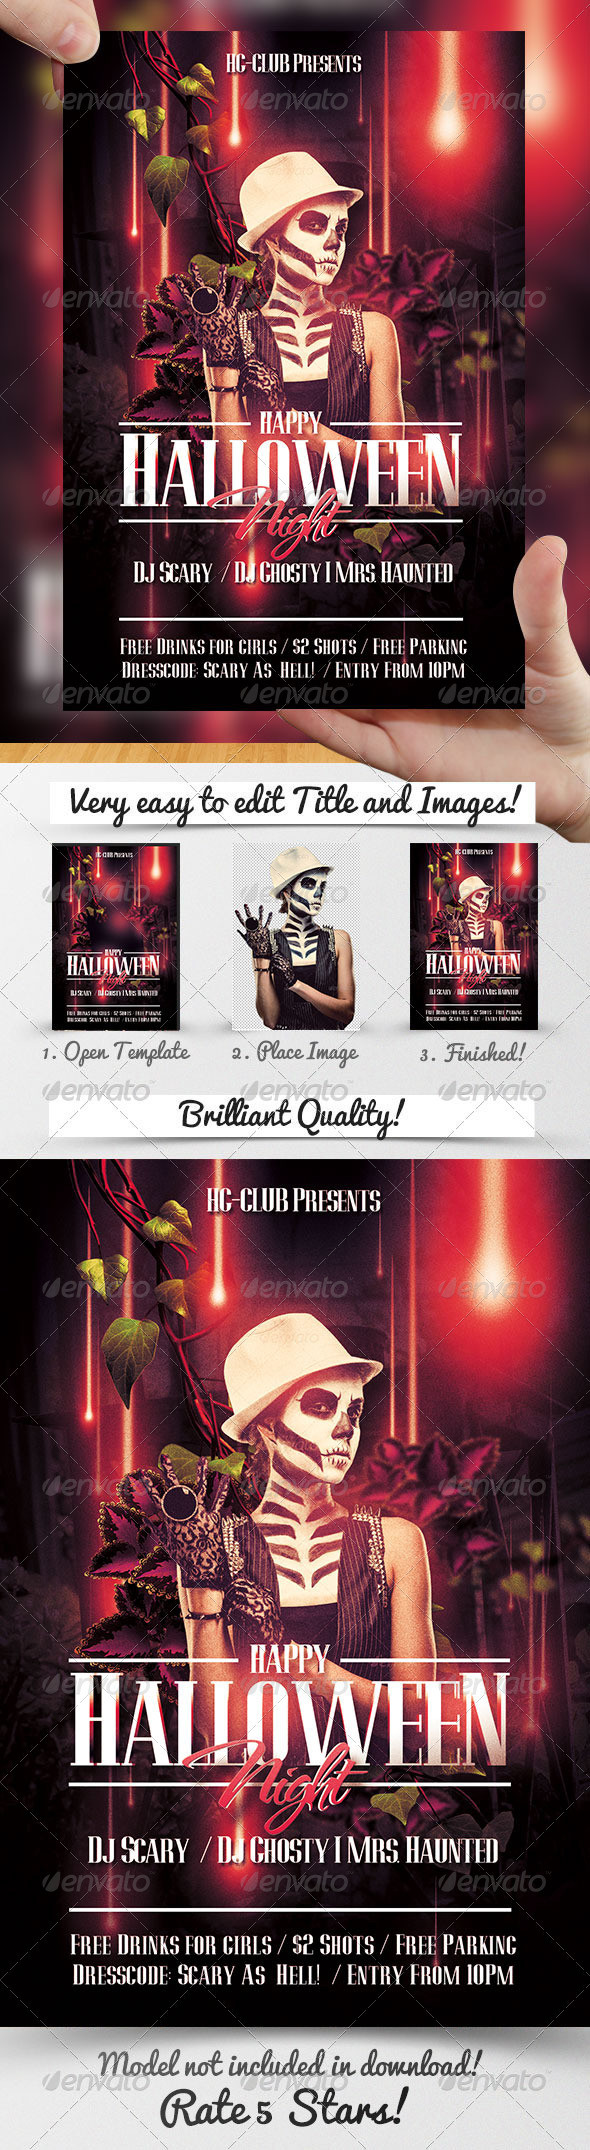 Halloween 20party 20psd 20flyer 20template 20preview